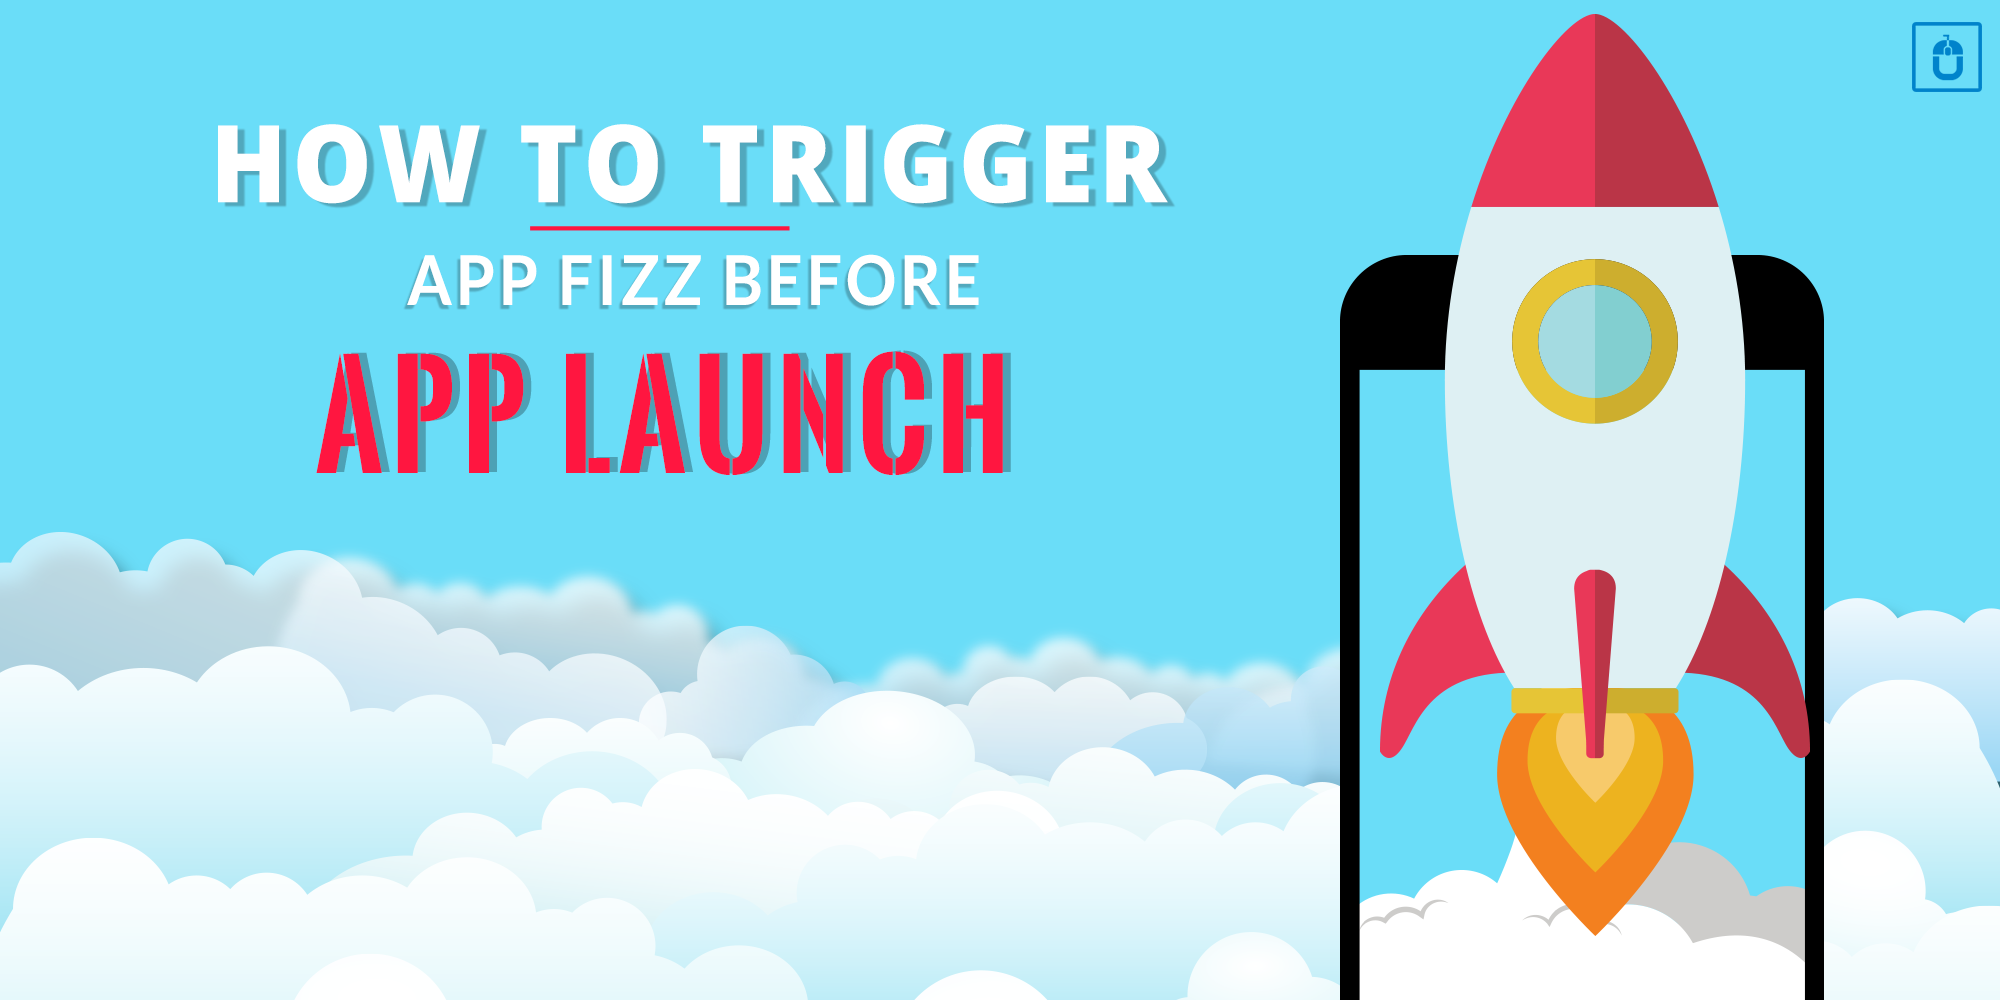 How To Trigger App Fizz Before App Launch